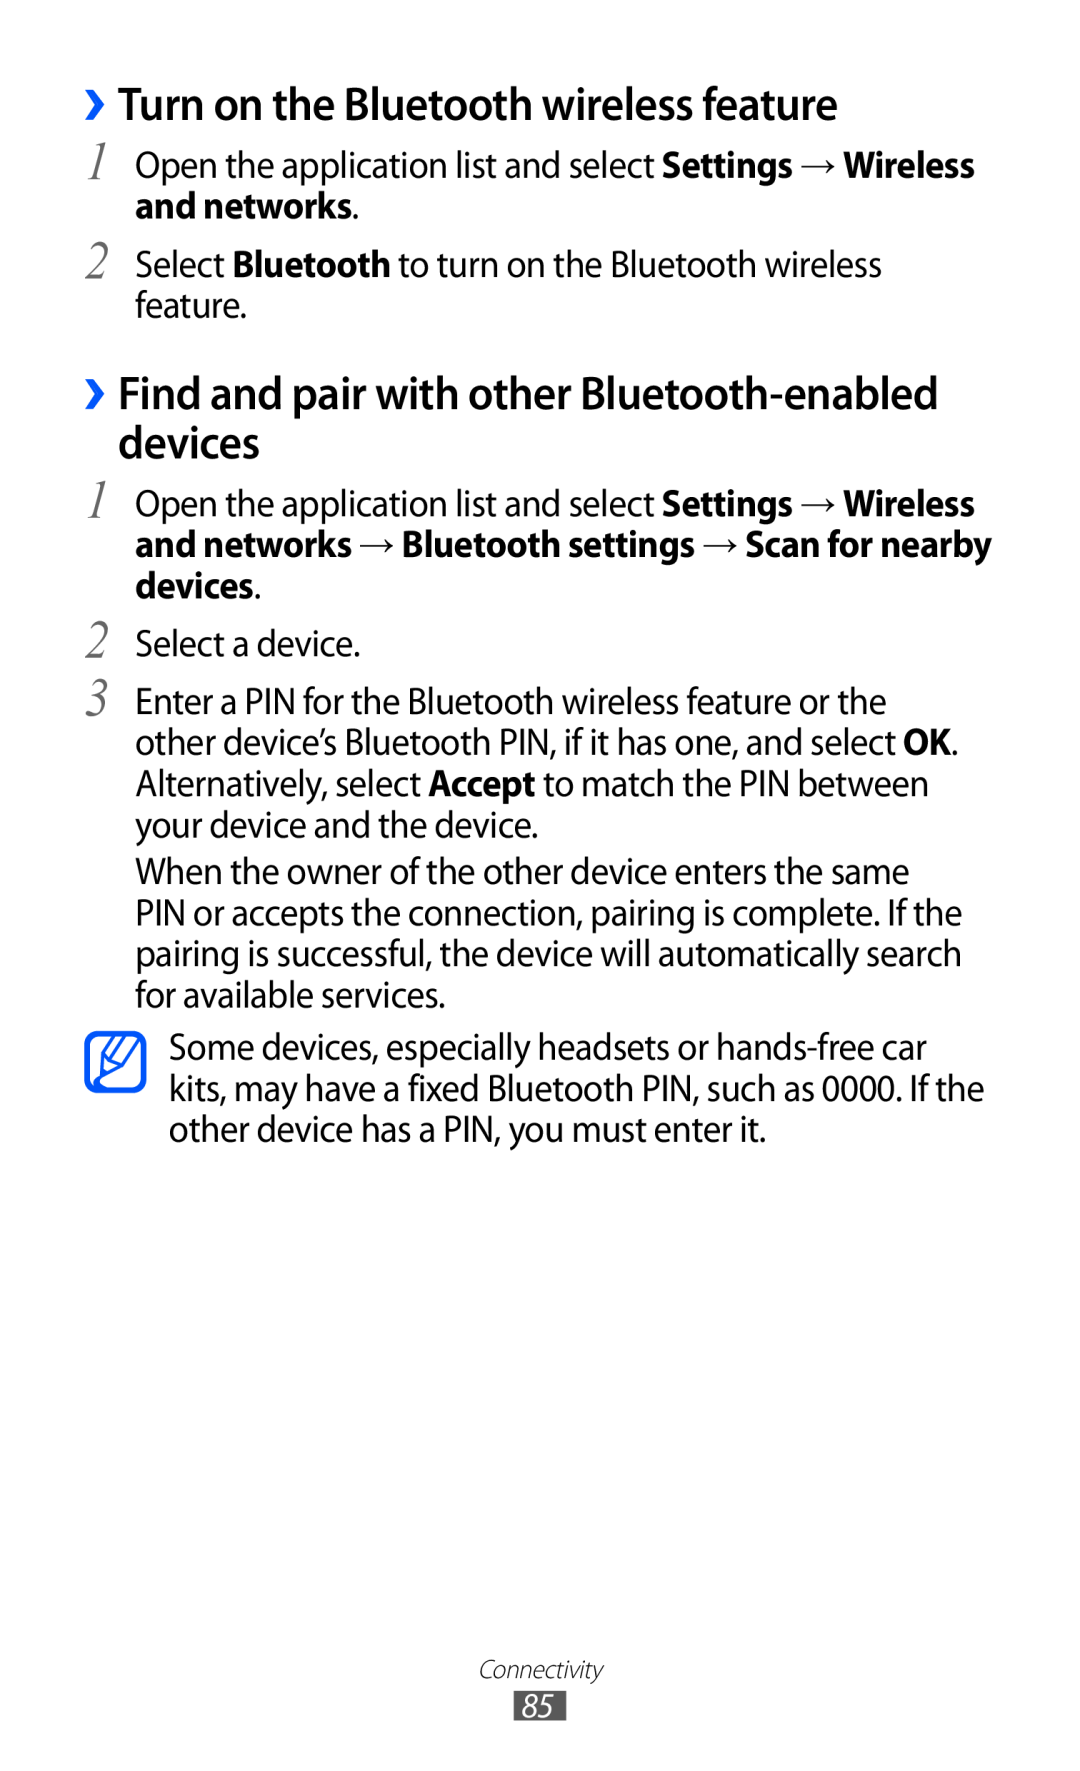 Samsung GT-P7320UWAPOL ››Turn on the Bluetooth wireless feature, ››Find and pair with other Bluetooth-enabled devices 